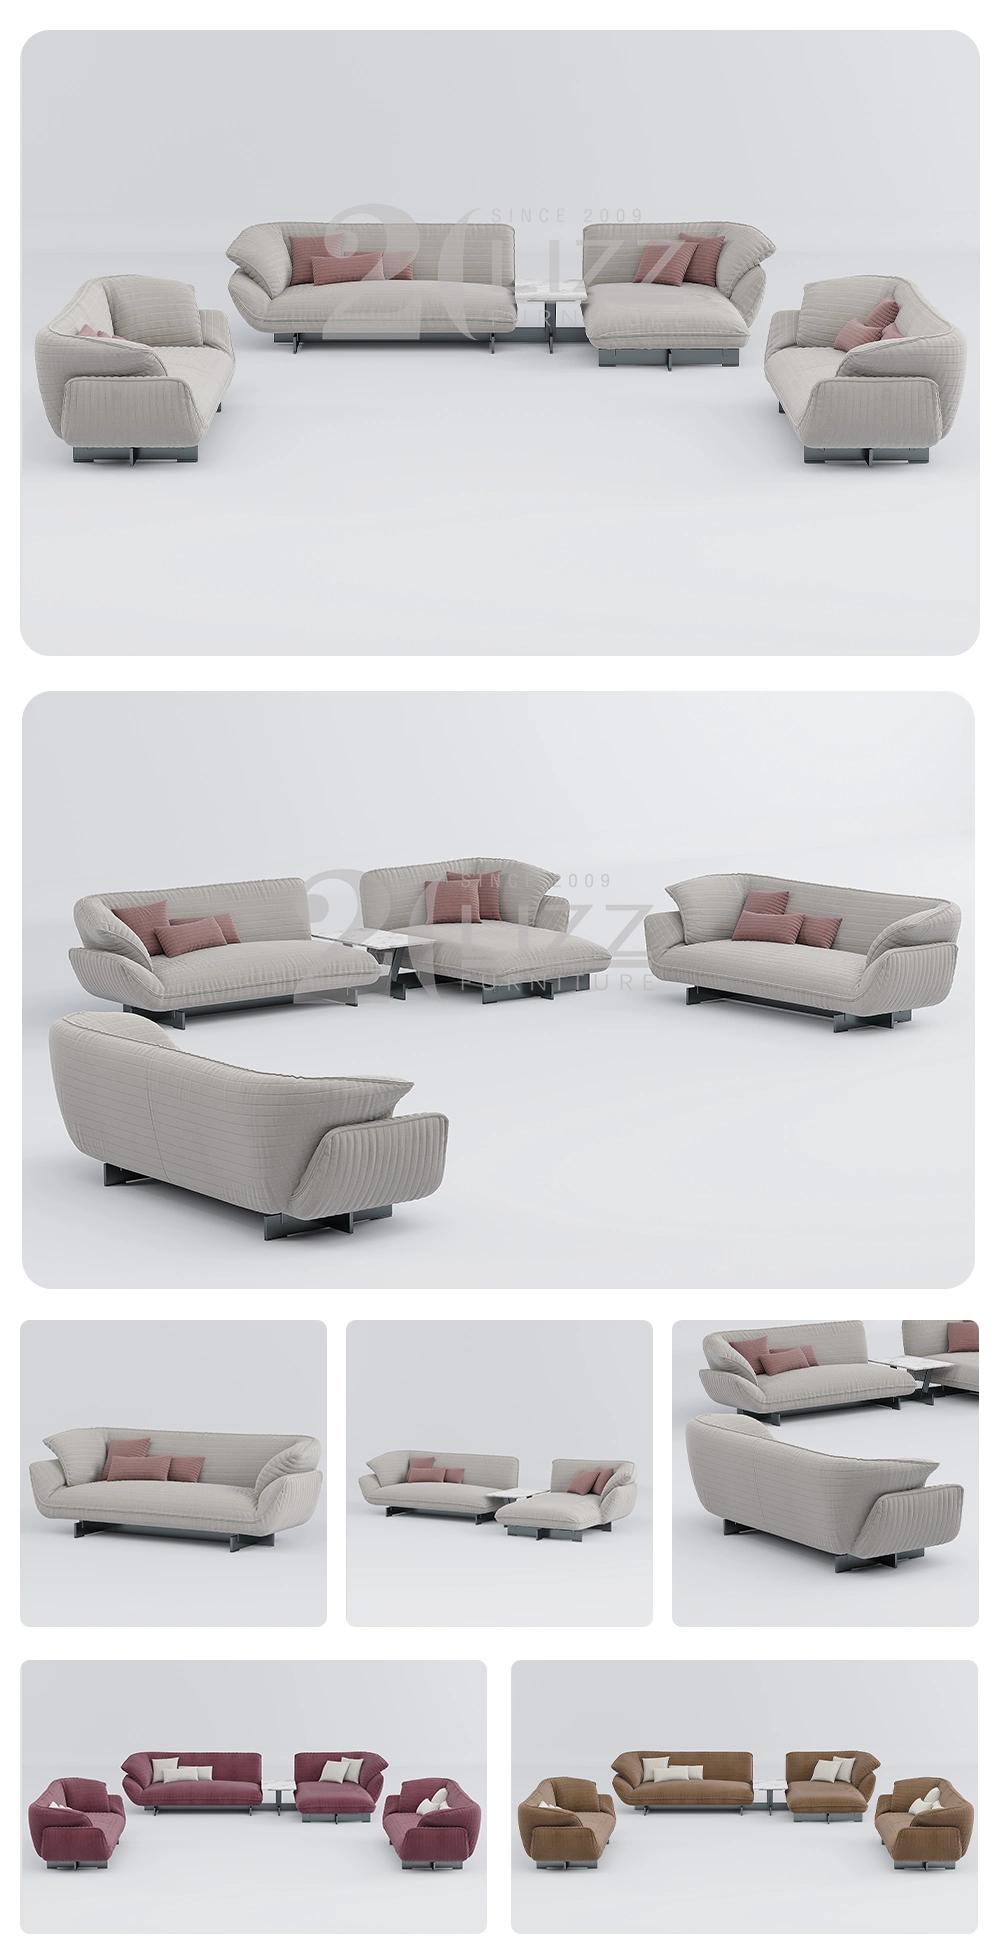 Modern Nordic Simple Design Sectional Home Fabric Sofa Furniture with Stainless Steel Feet